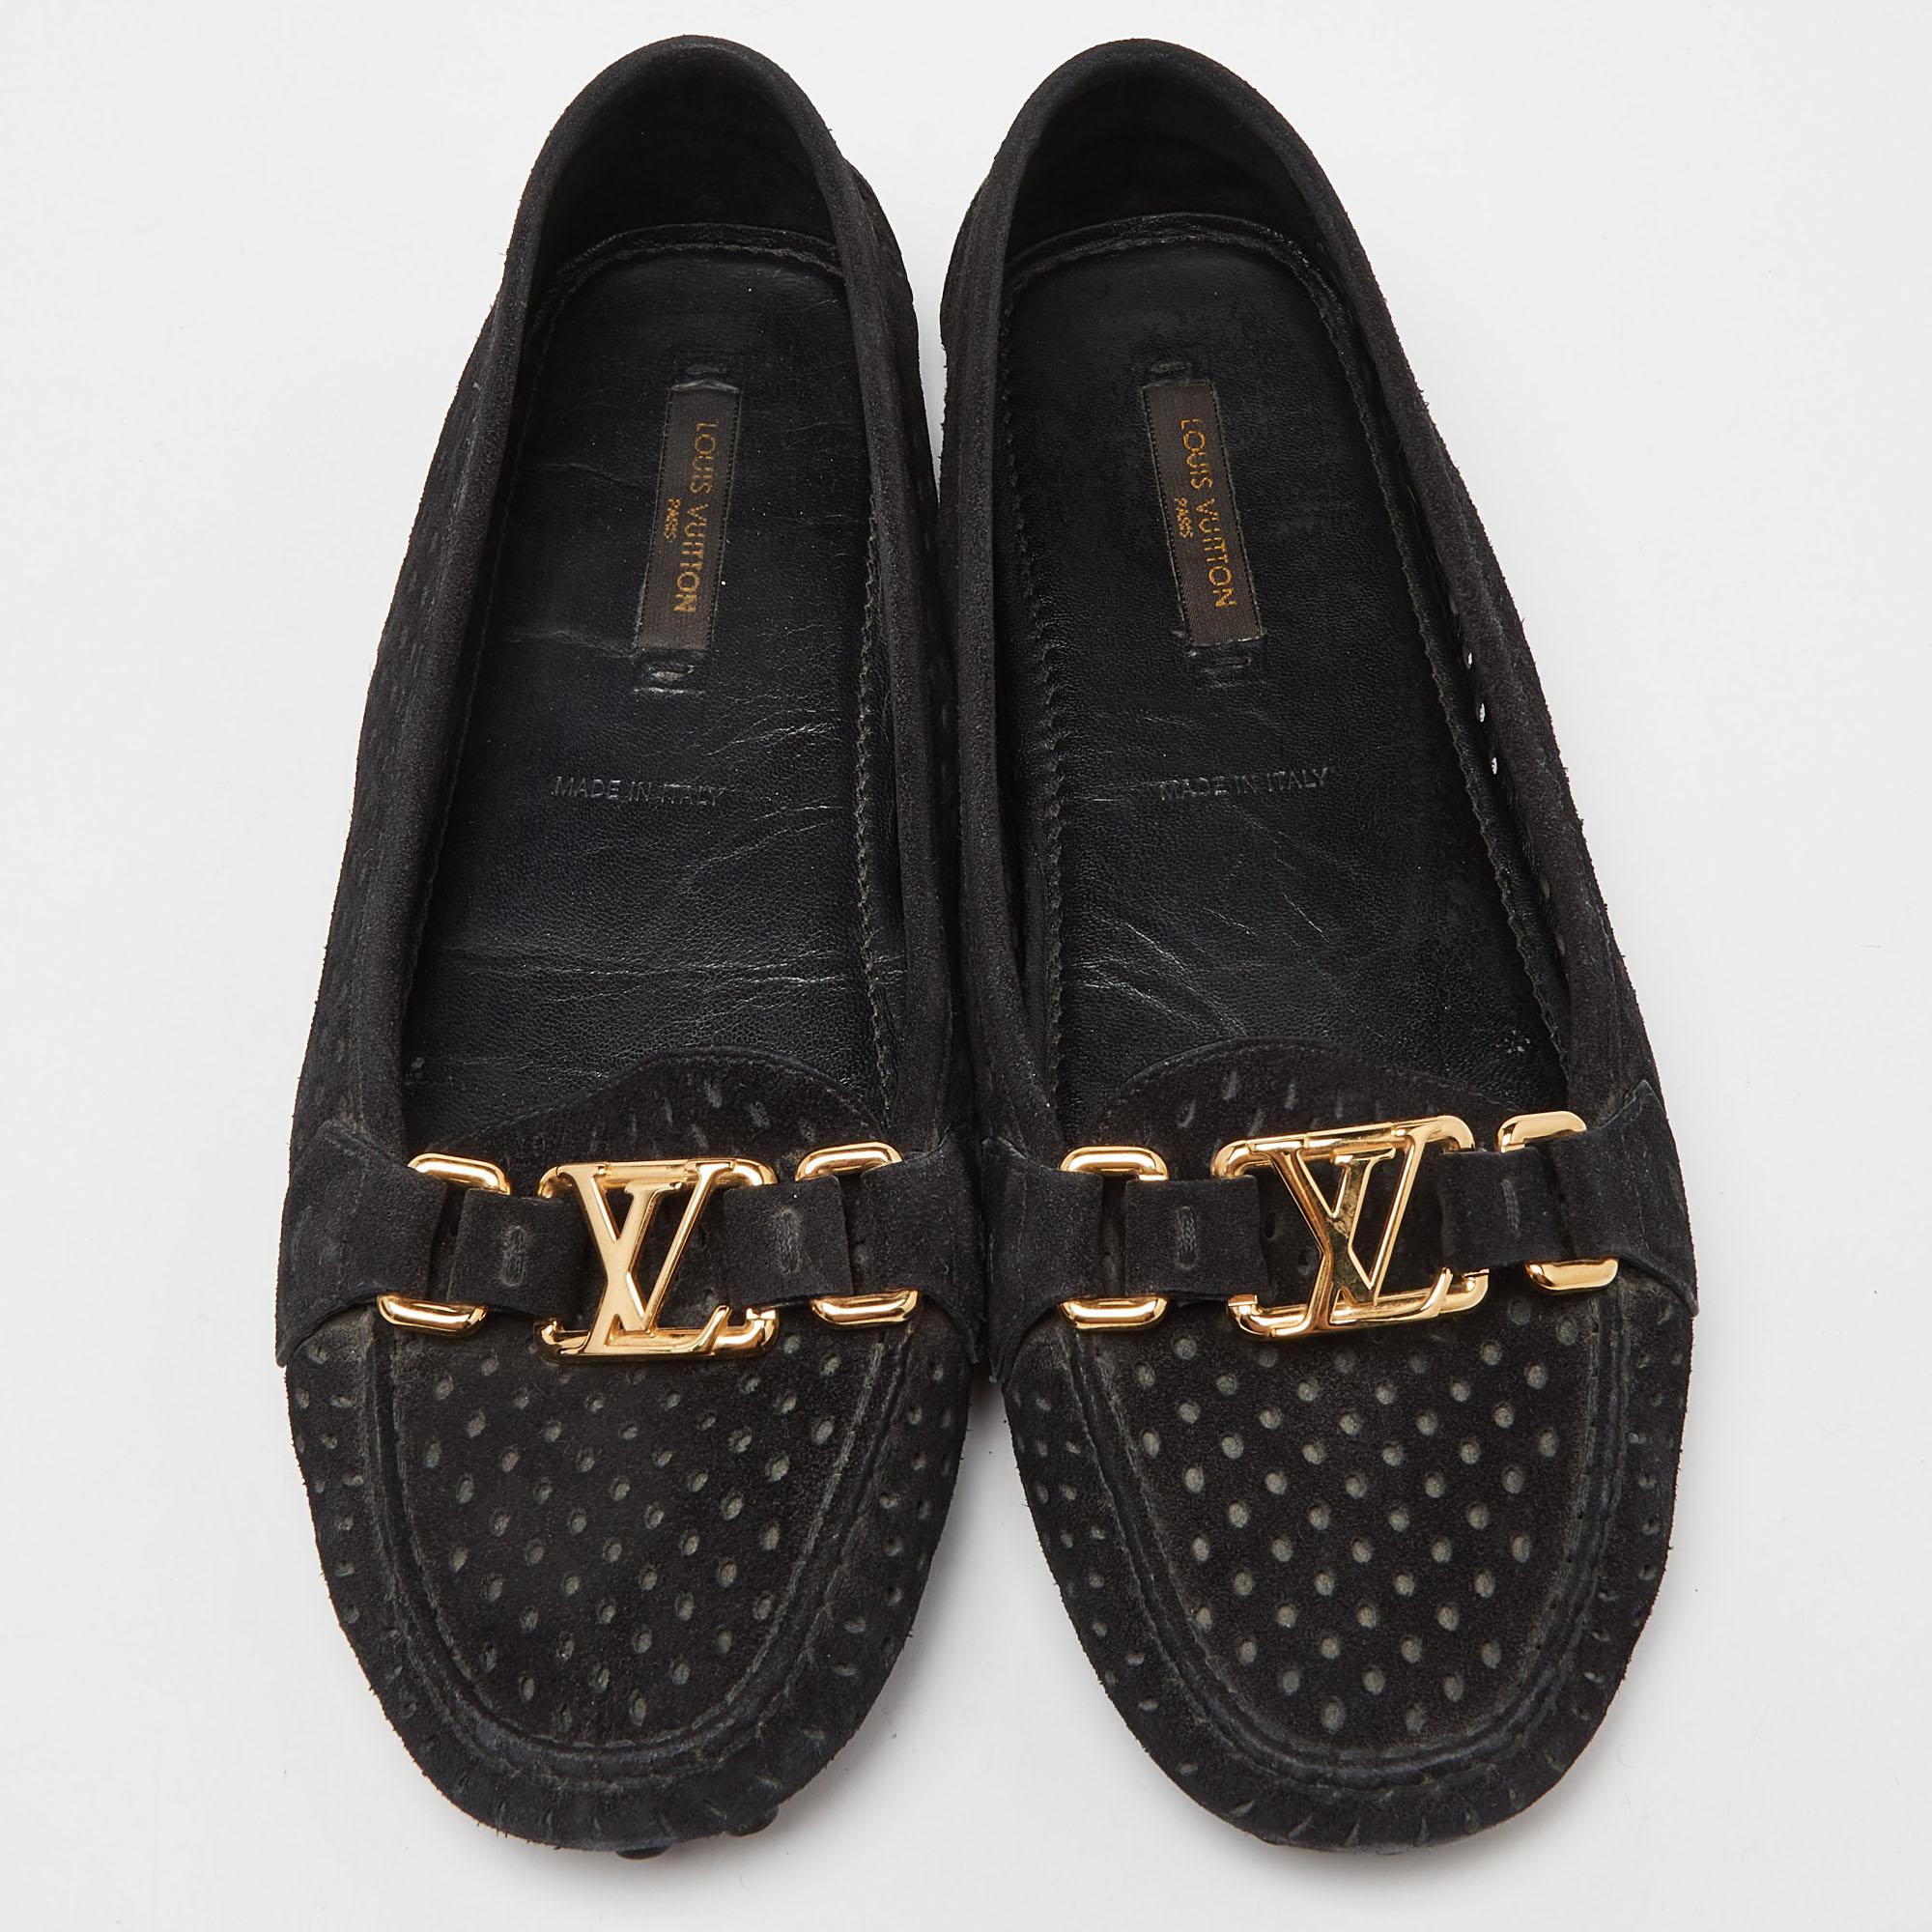 Let this comfortable pair be your first choice when you're out for a long day. These LV shoes have well-sewn uppers beautifully set on durable soles.

Includes
Original Box